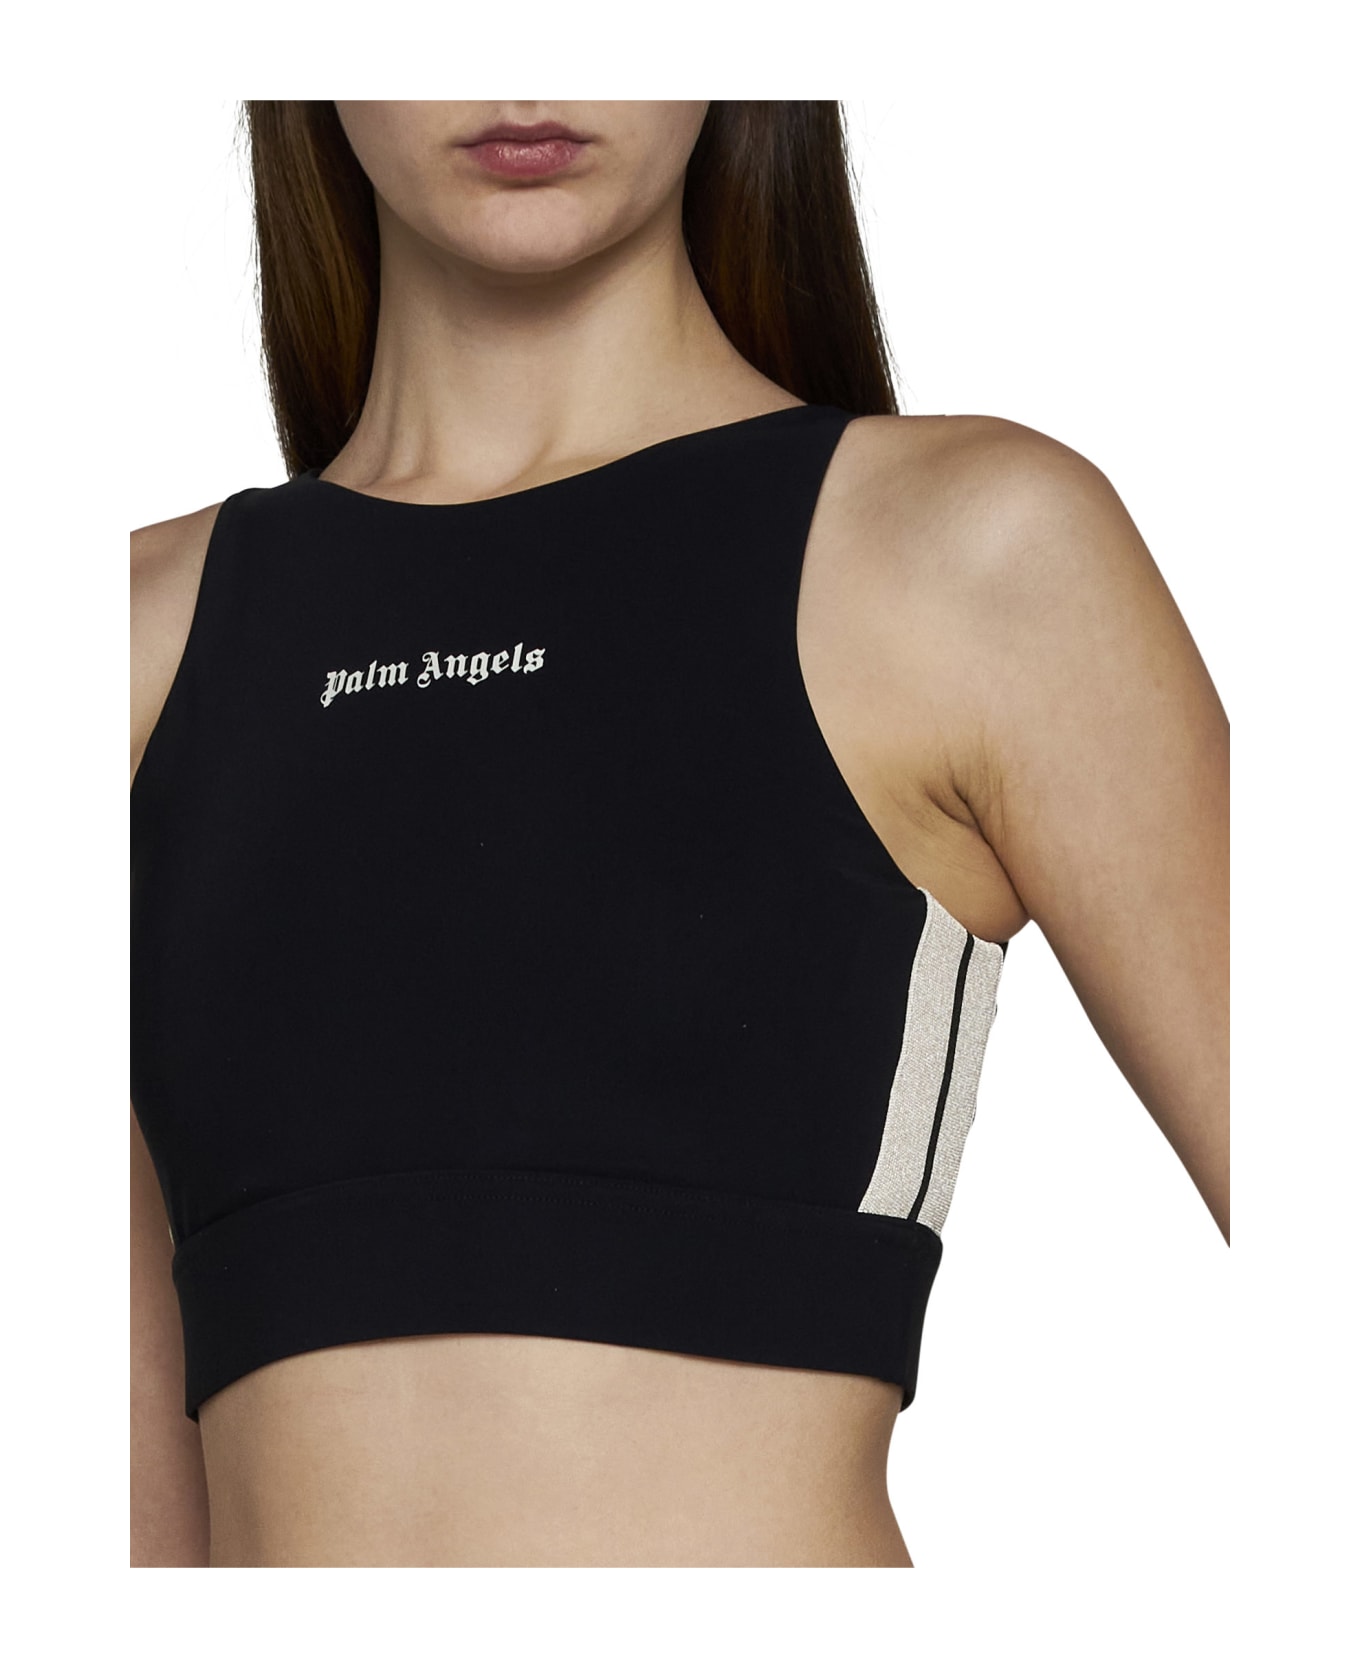 Palm Angels 'b Track Training' Sports Top - Black off white ランジェリー＆パジャマ